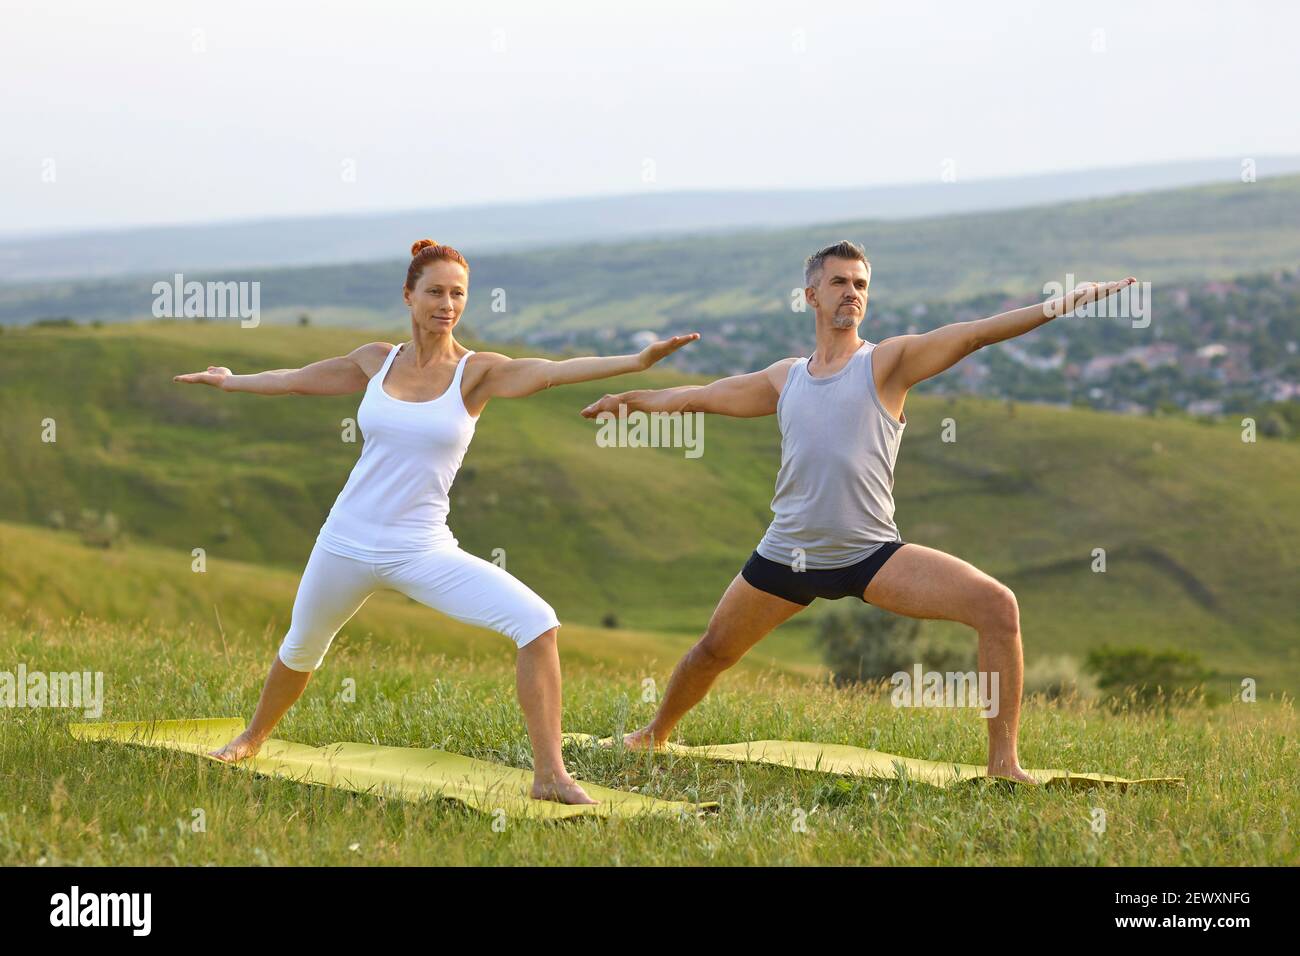 Middle aged couple doing Warrior II pose while practicing yoga on grassy hill in countryside Stock Photo